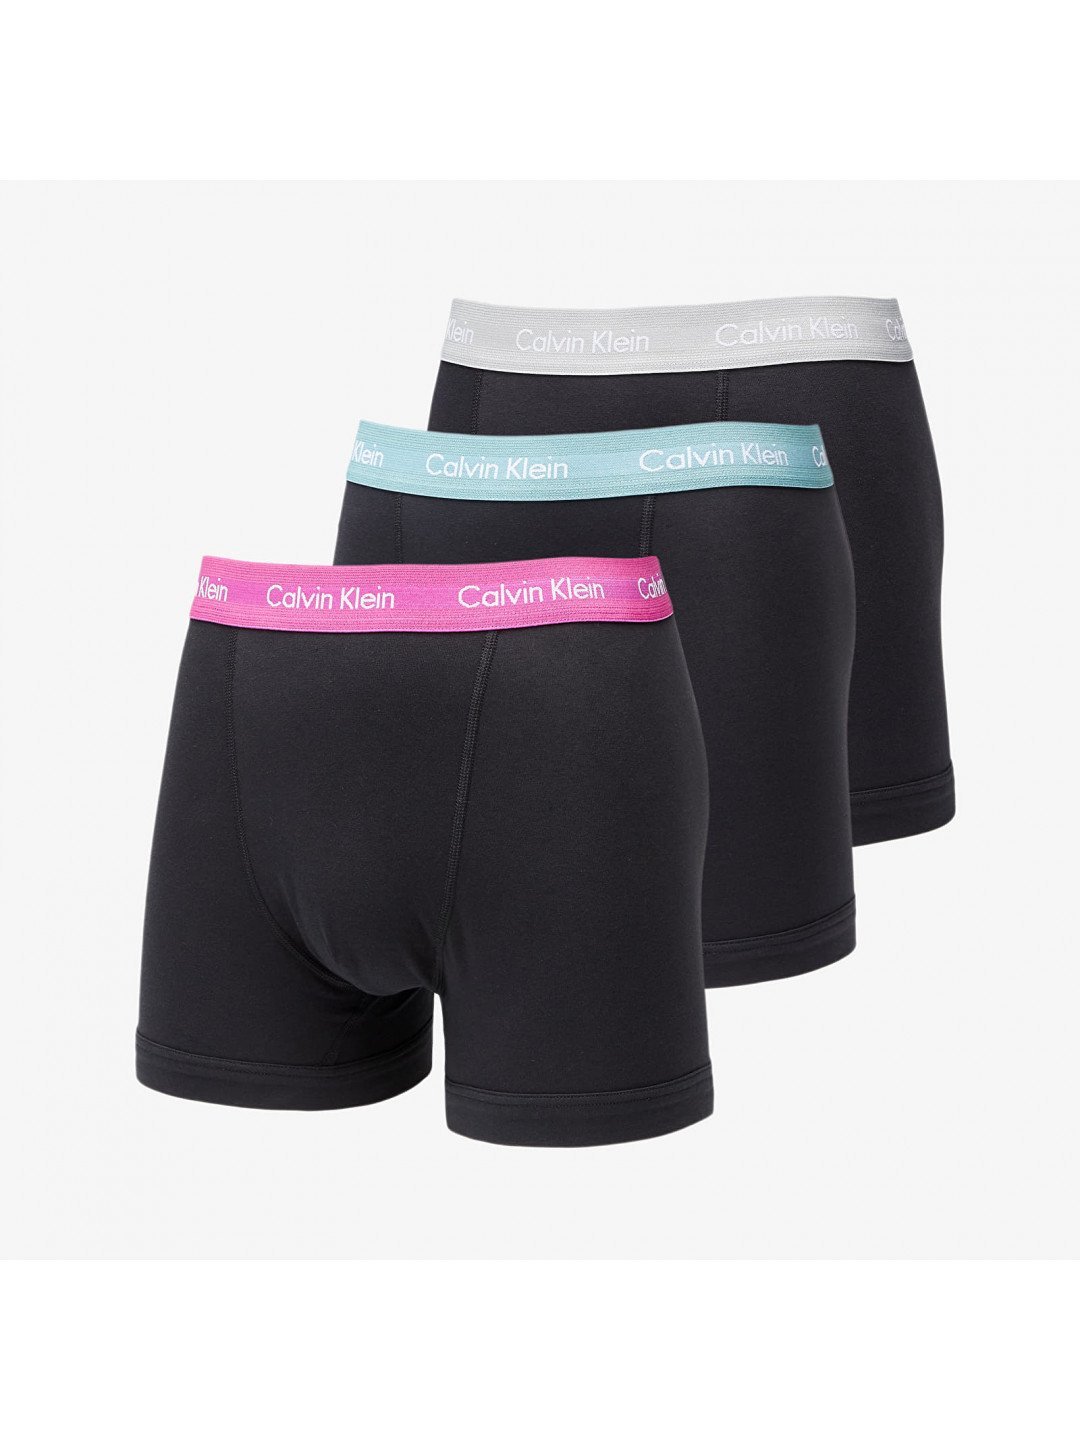 Calvin Klein Cotton Stretch Classic Fit Trunk 3-Pack Black Wild Aster Grey Heather Artic Green WB